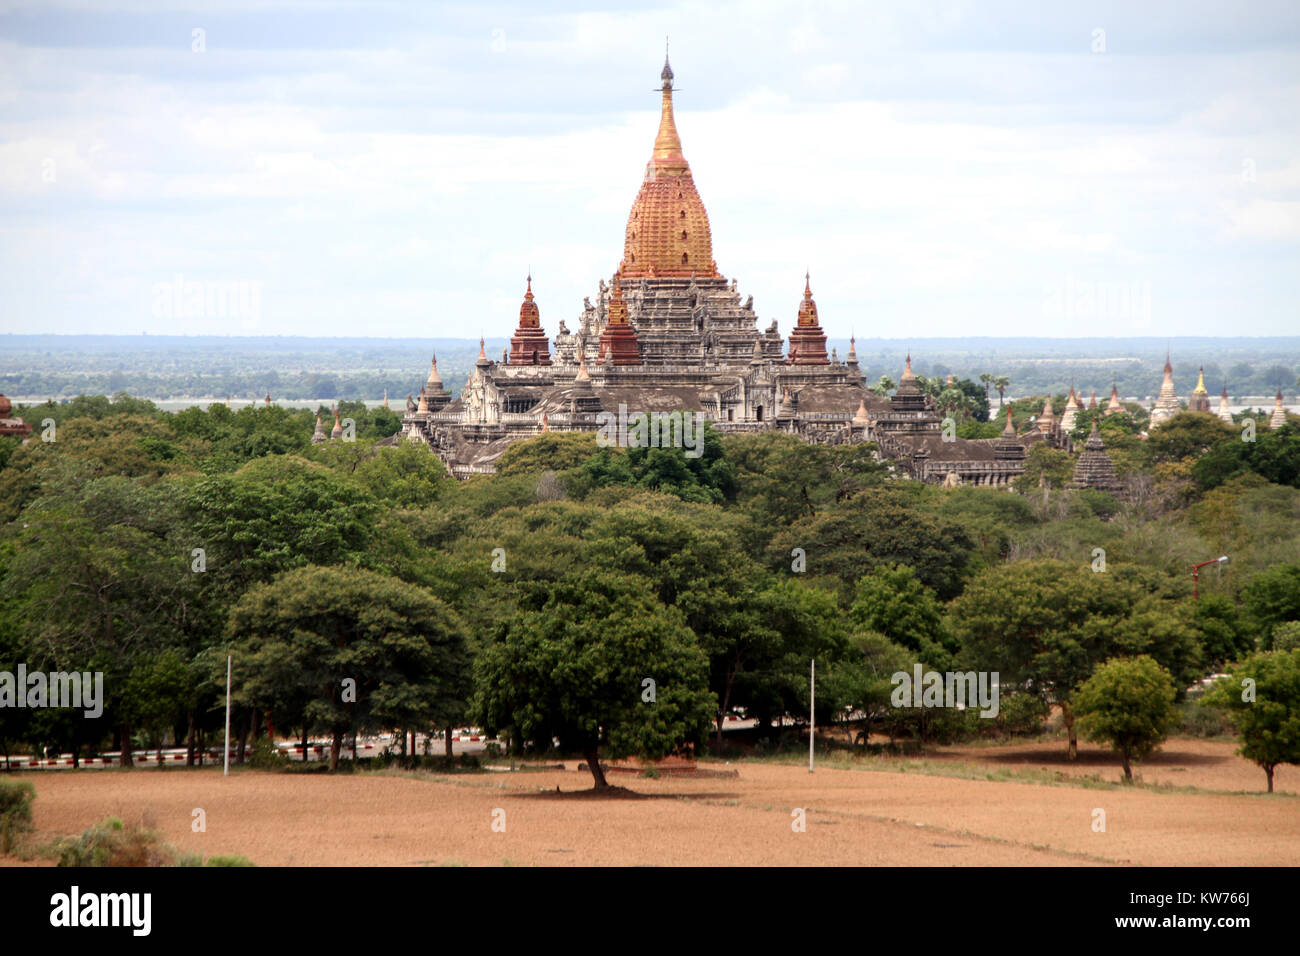 View from Mingala zedi on the Ananda temple in Bagan, Myanmar Stock Photo